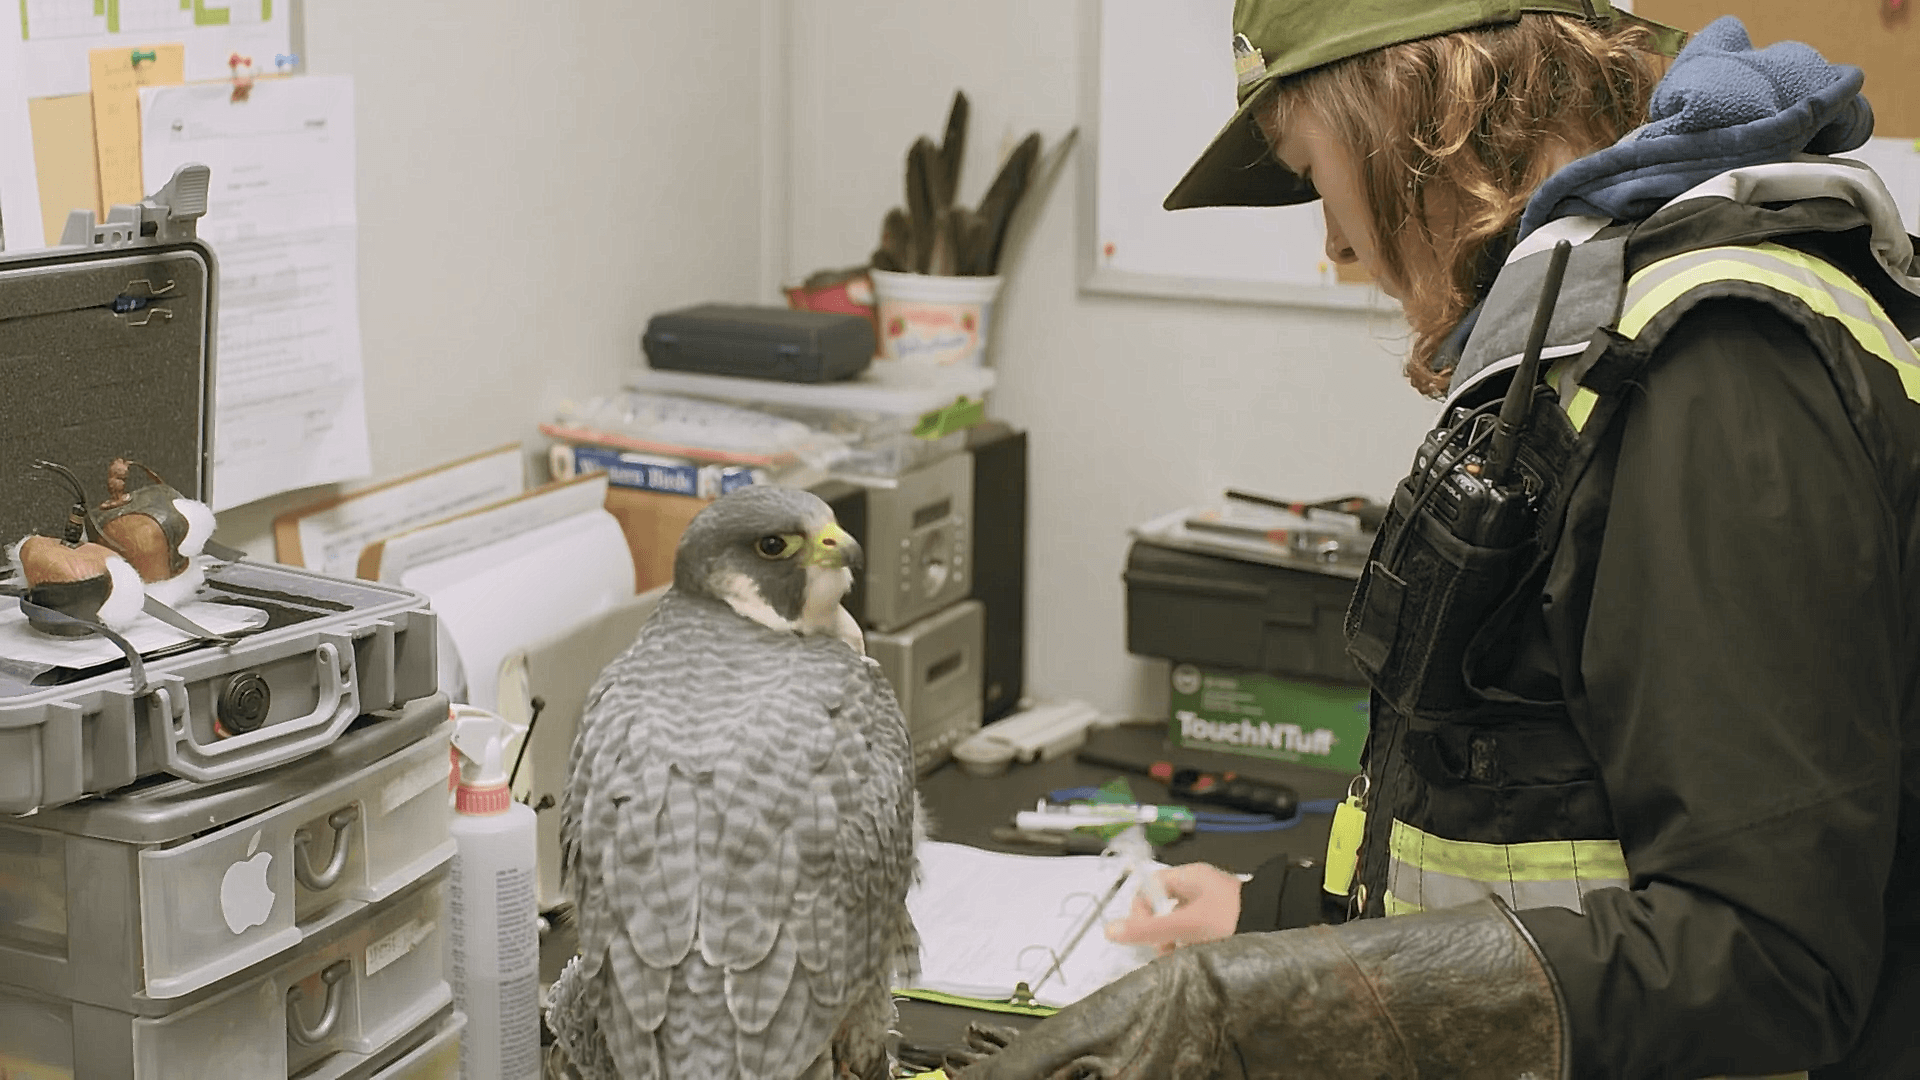 Raptors employee and a falcon log data in a book